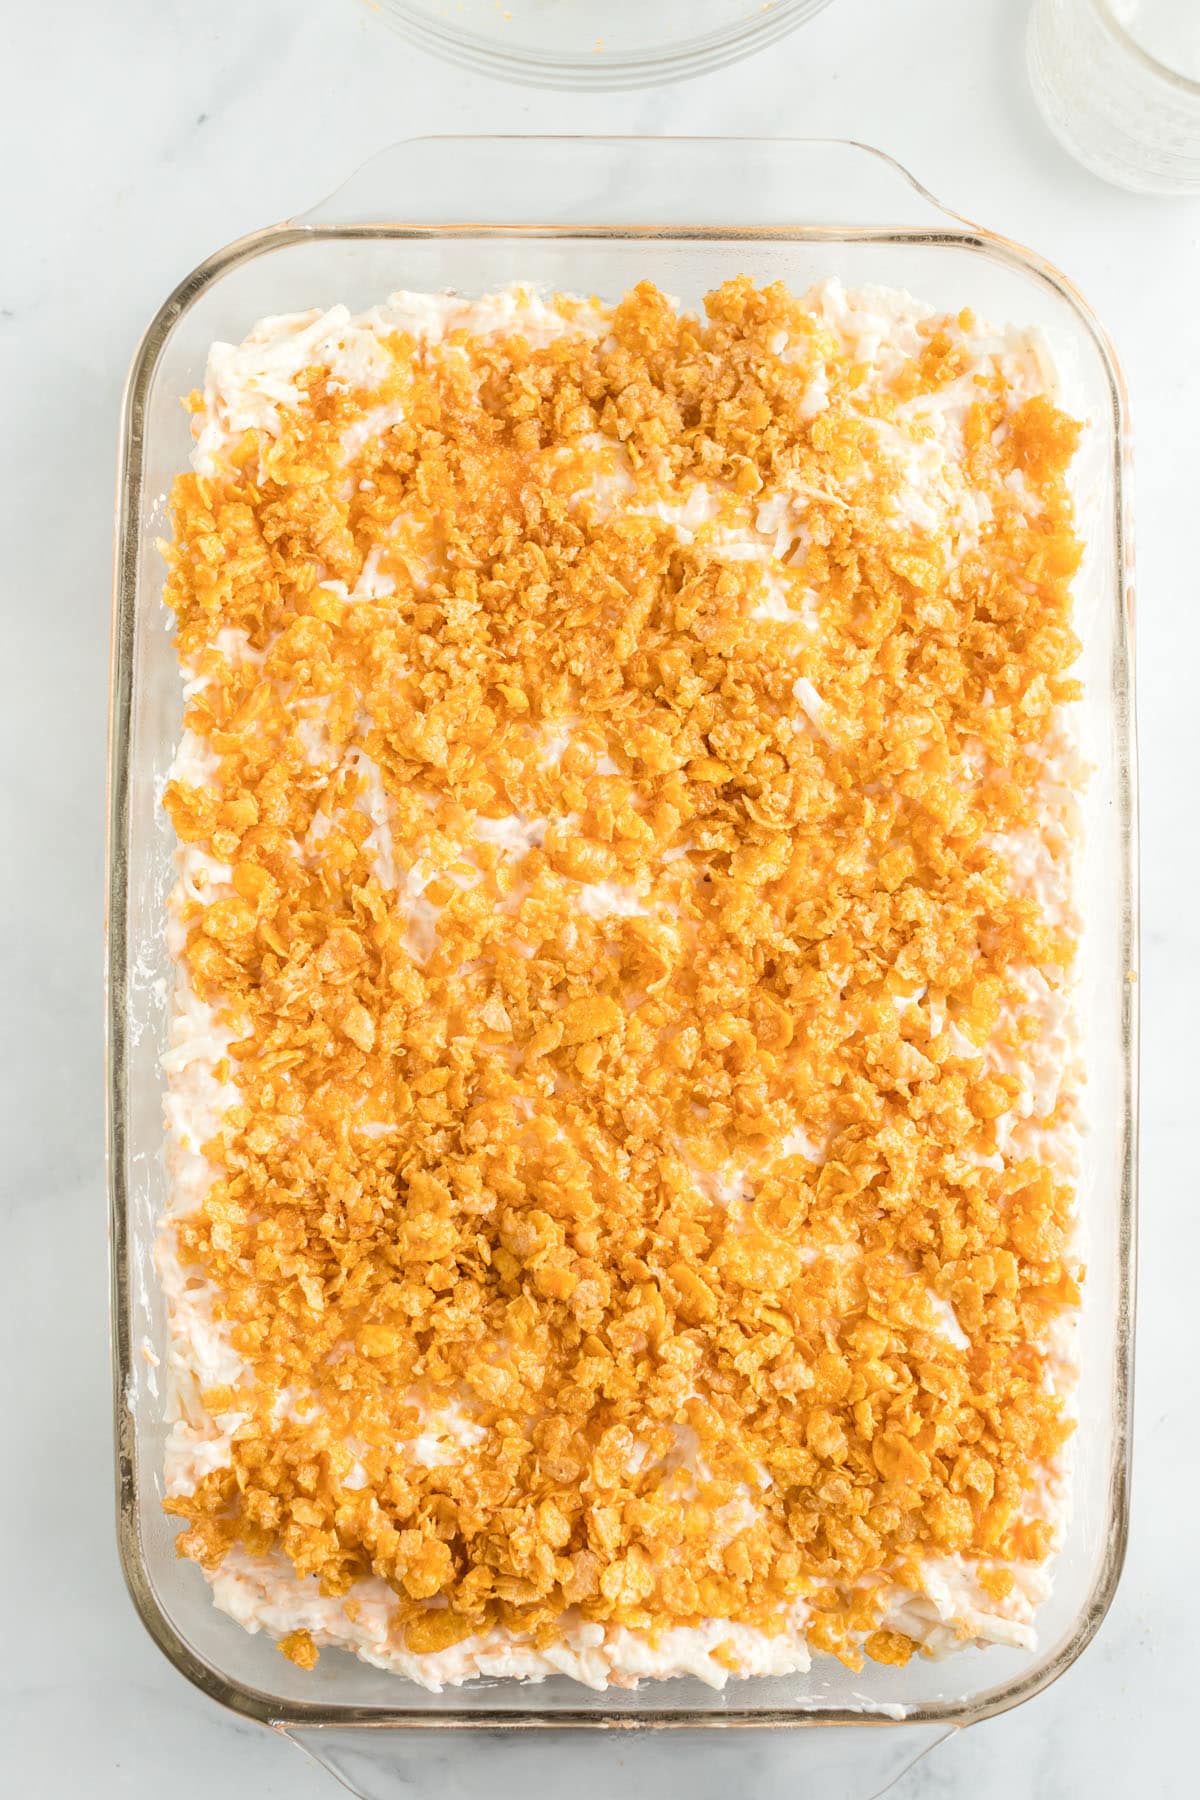 sprinkle corn flake mixture evenly over the top of the casserole